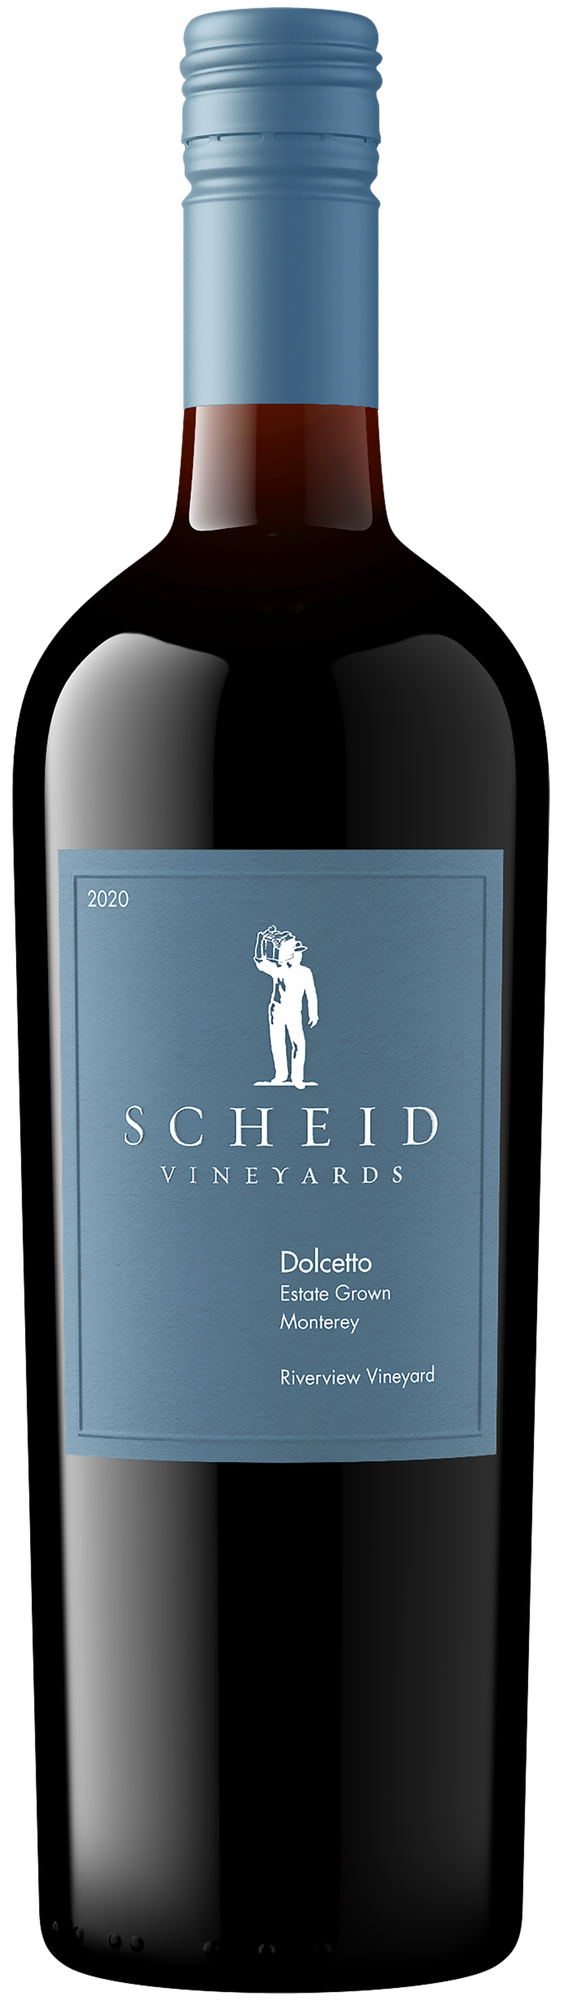 2020 Dolcetto